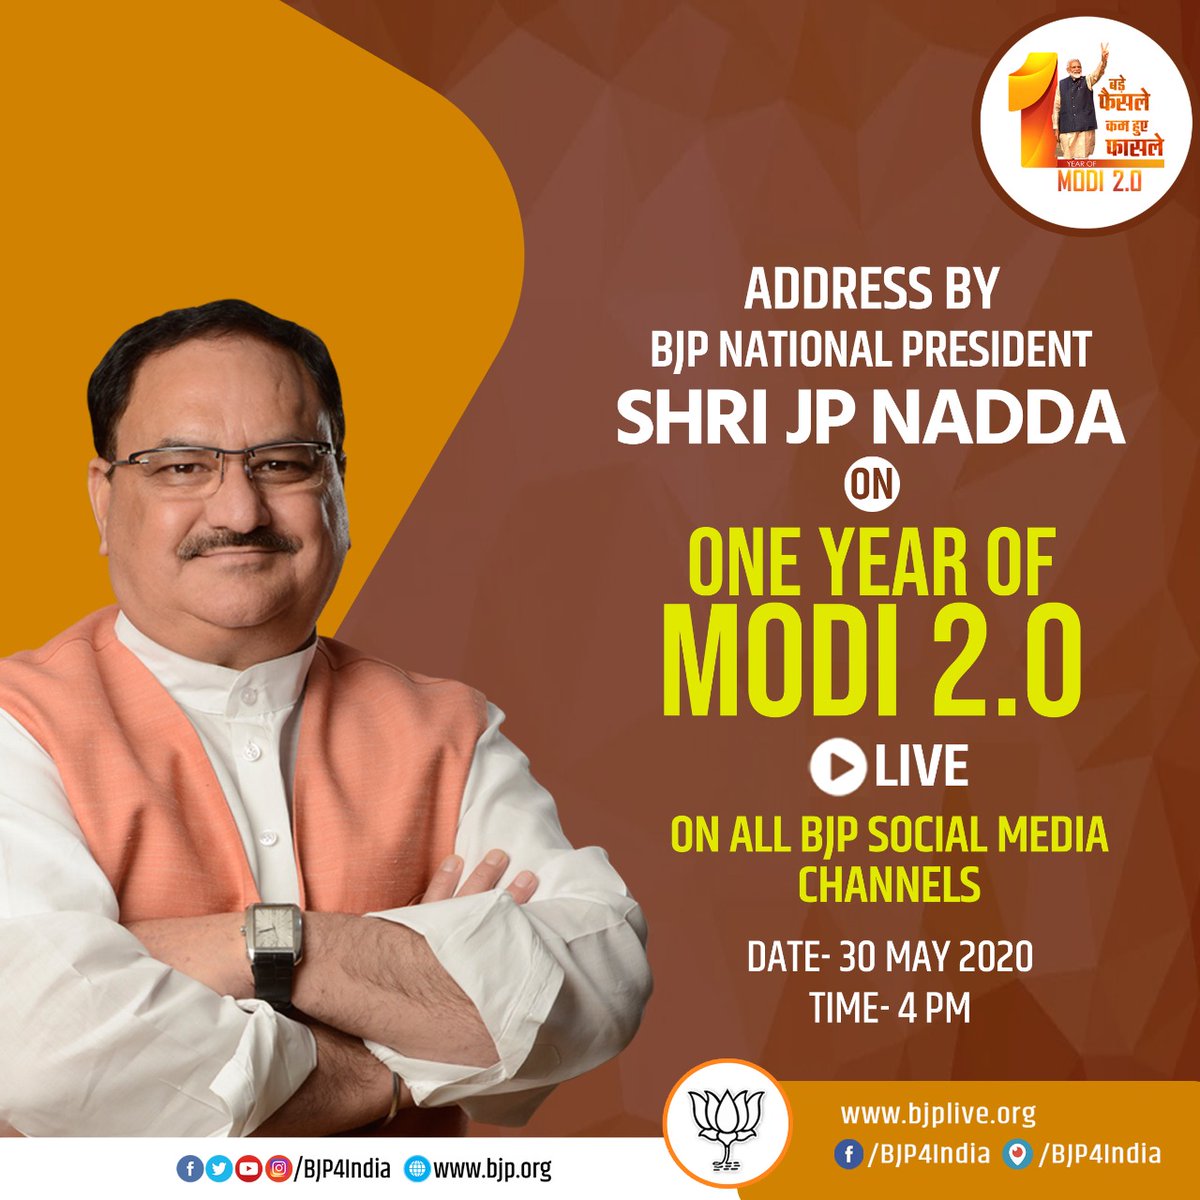 BJP National President Shri @JPNadda's address on the completion of 'one year of Modi 2.0' at 4 pm on 30th May 2020. Watch live on • facebook.com/BJP4India • pscp.tv/BJP4India • youtu.be/aGo484HsnY4 • bjplive.org #1YearofModi2